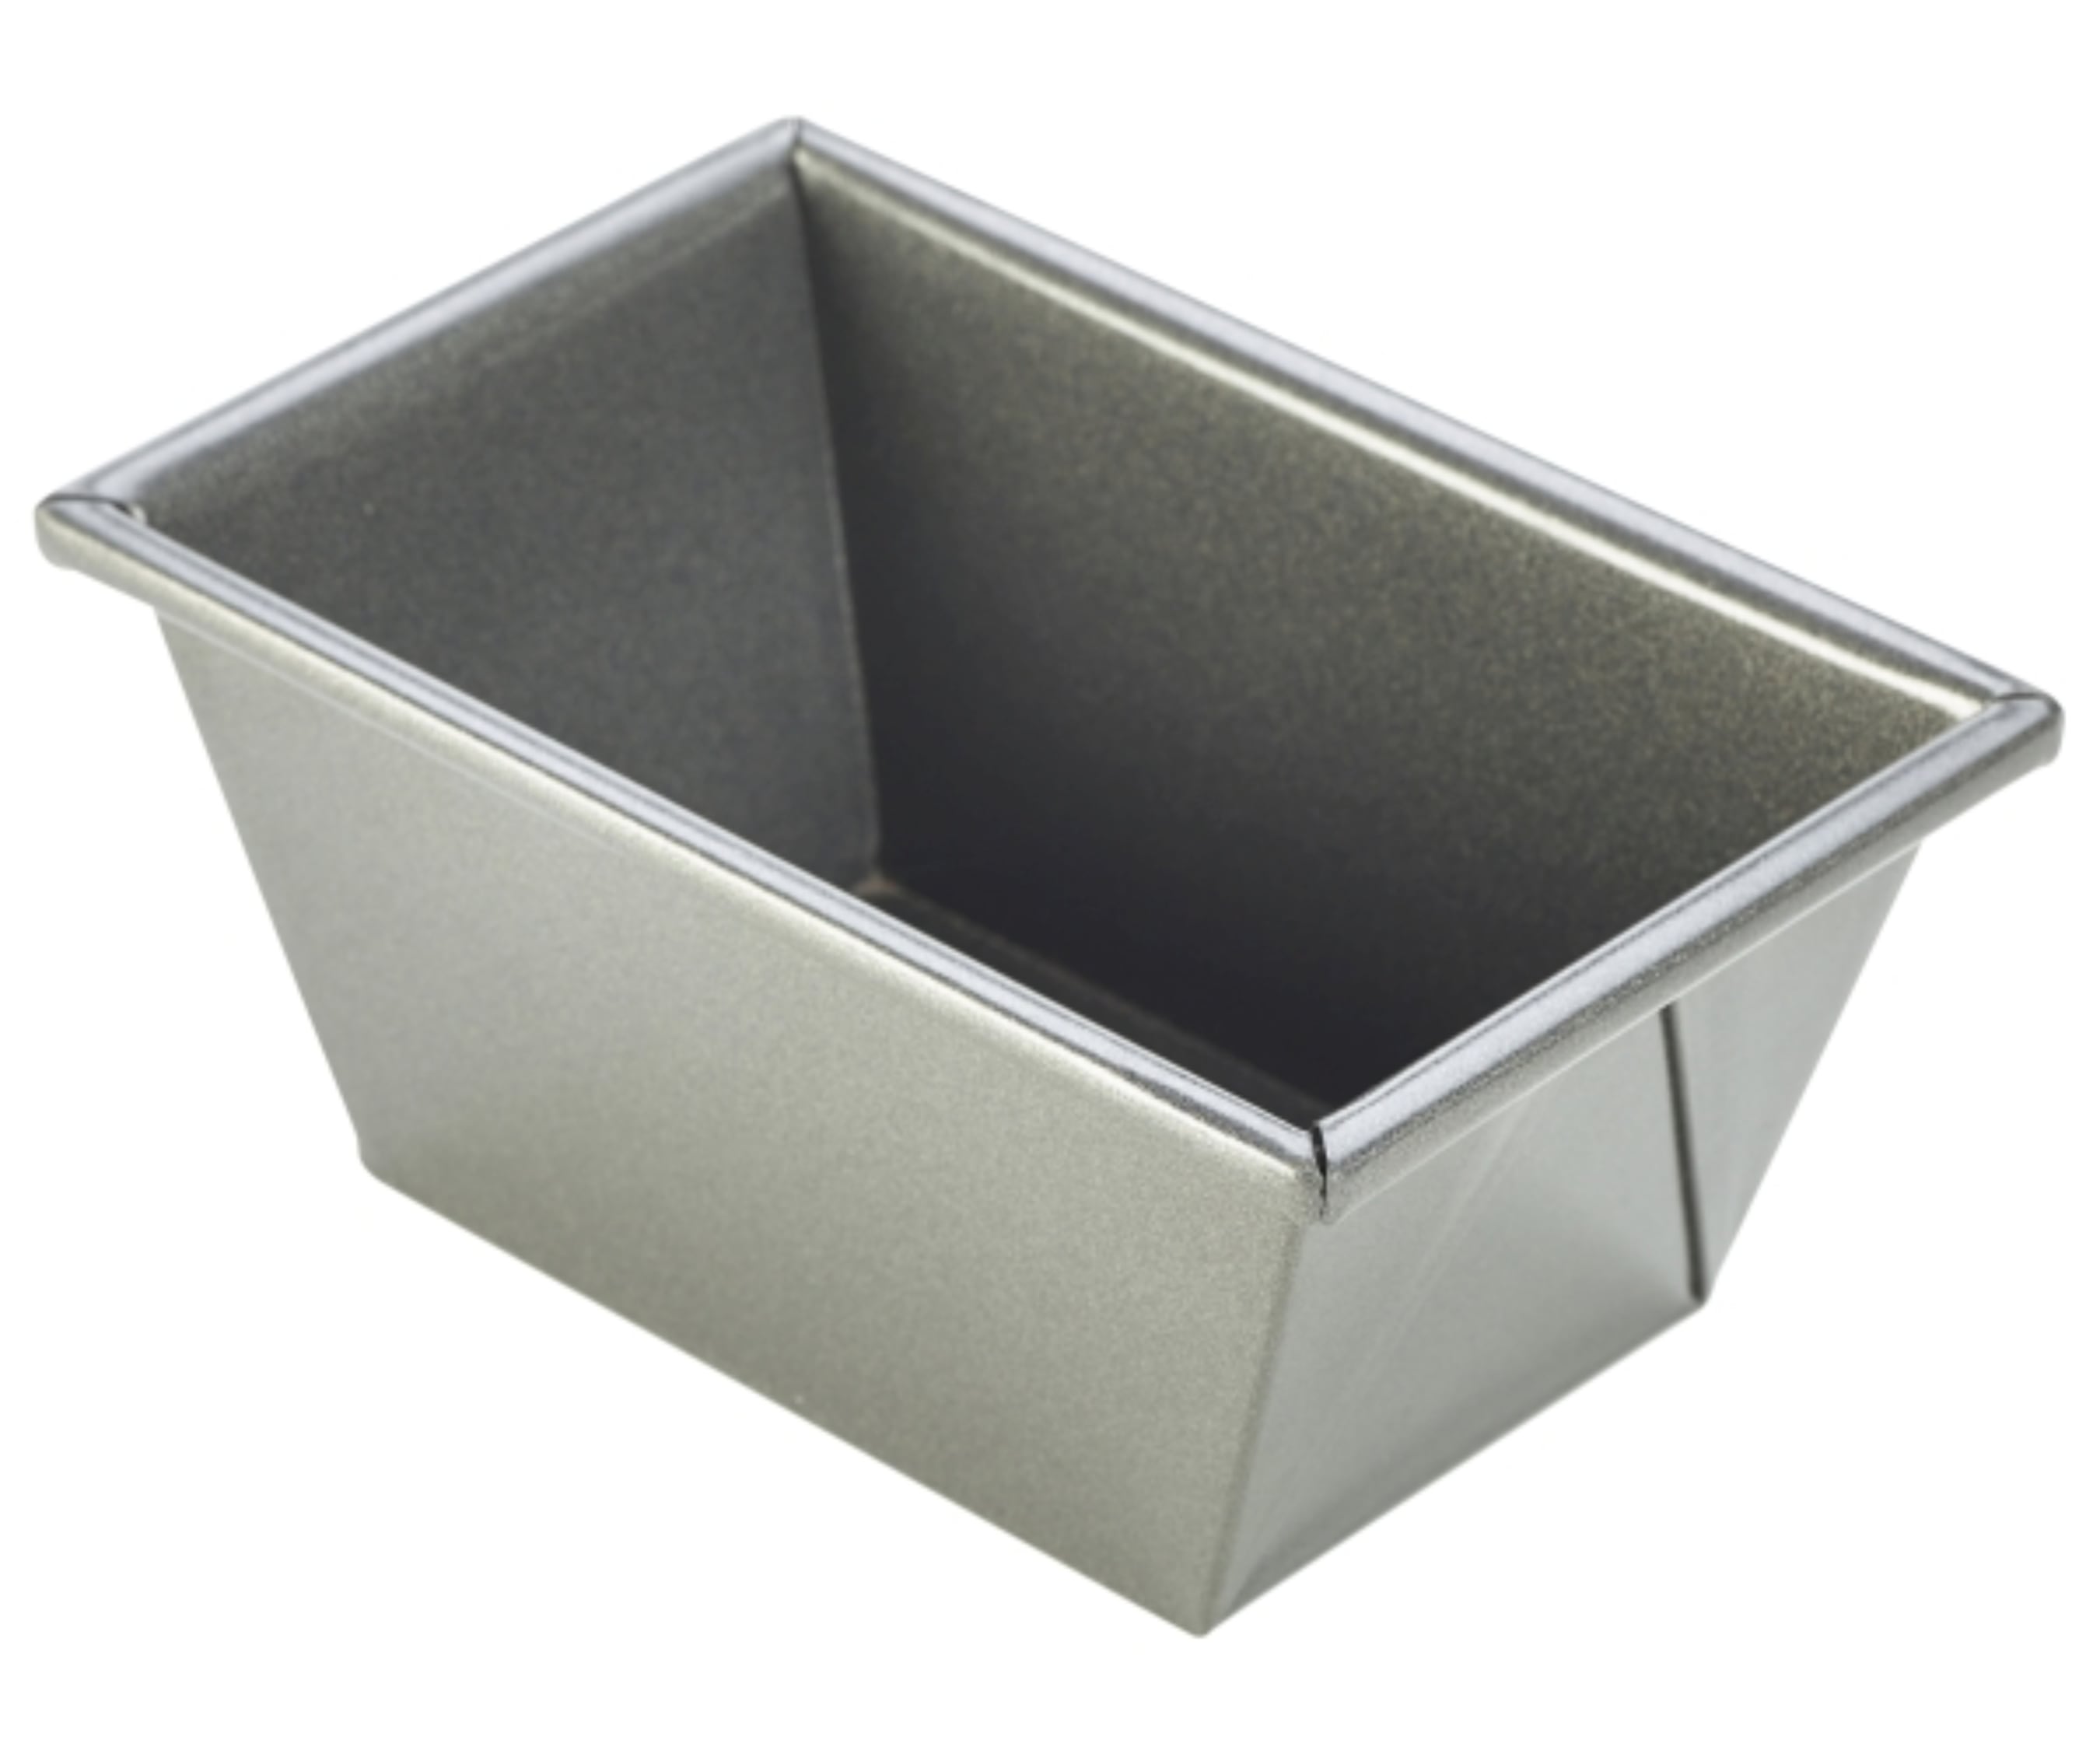 Genware Carbon Steel Non-Stick Traditional Loaf Pan 16 x 10.5cm